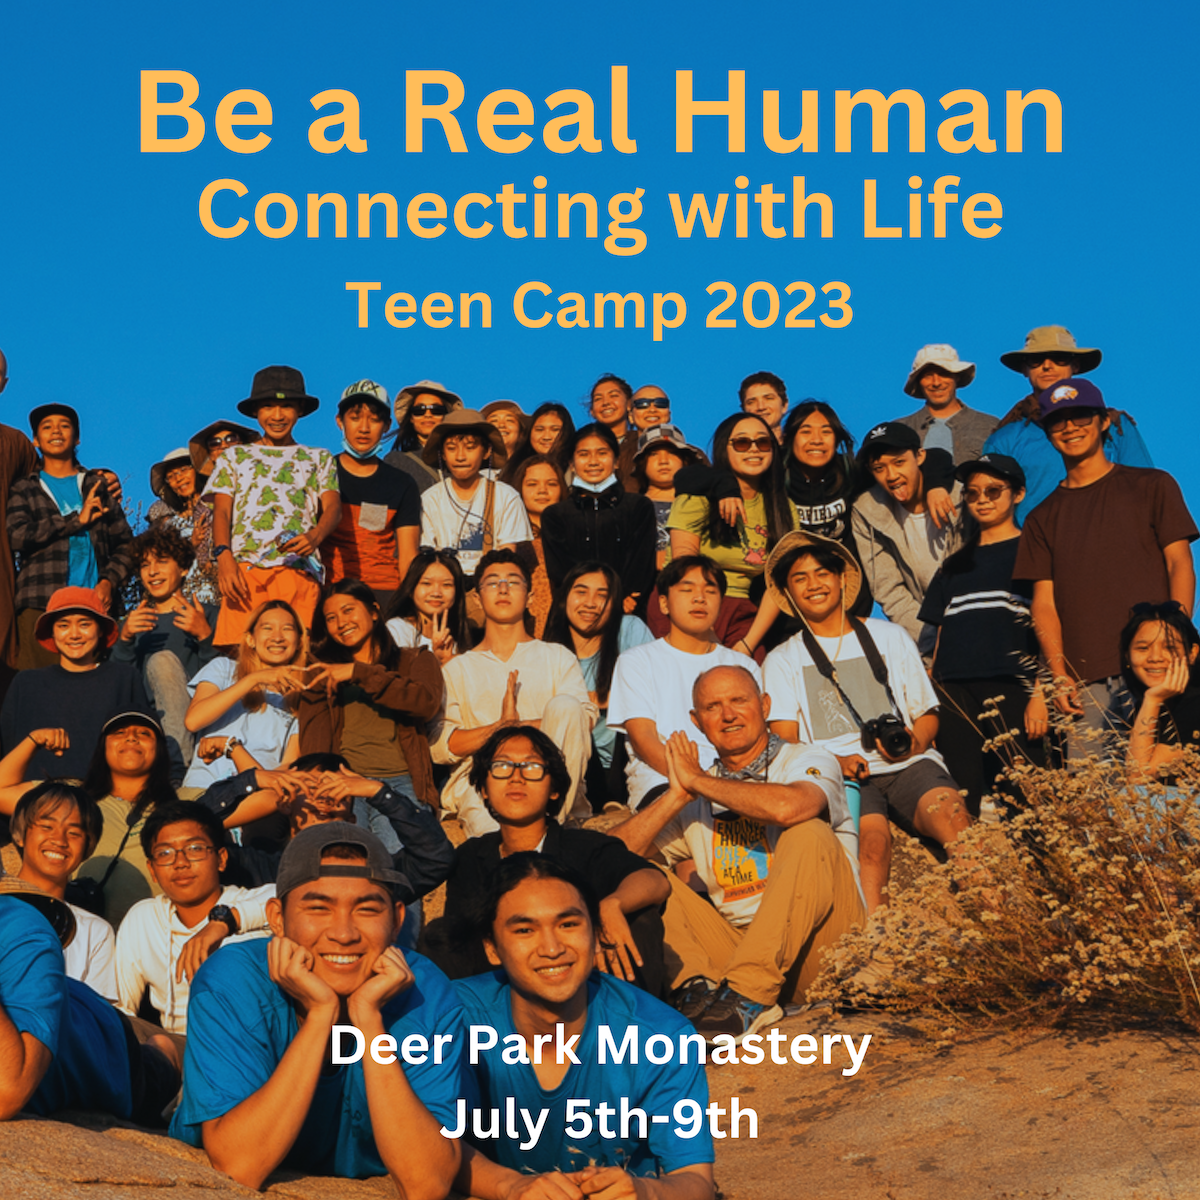 Teen Camp: Be a Real Human, Connecting with Life